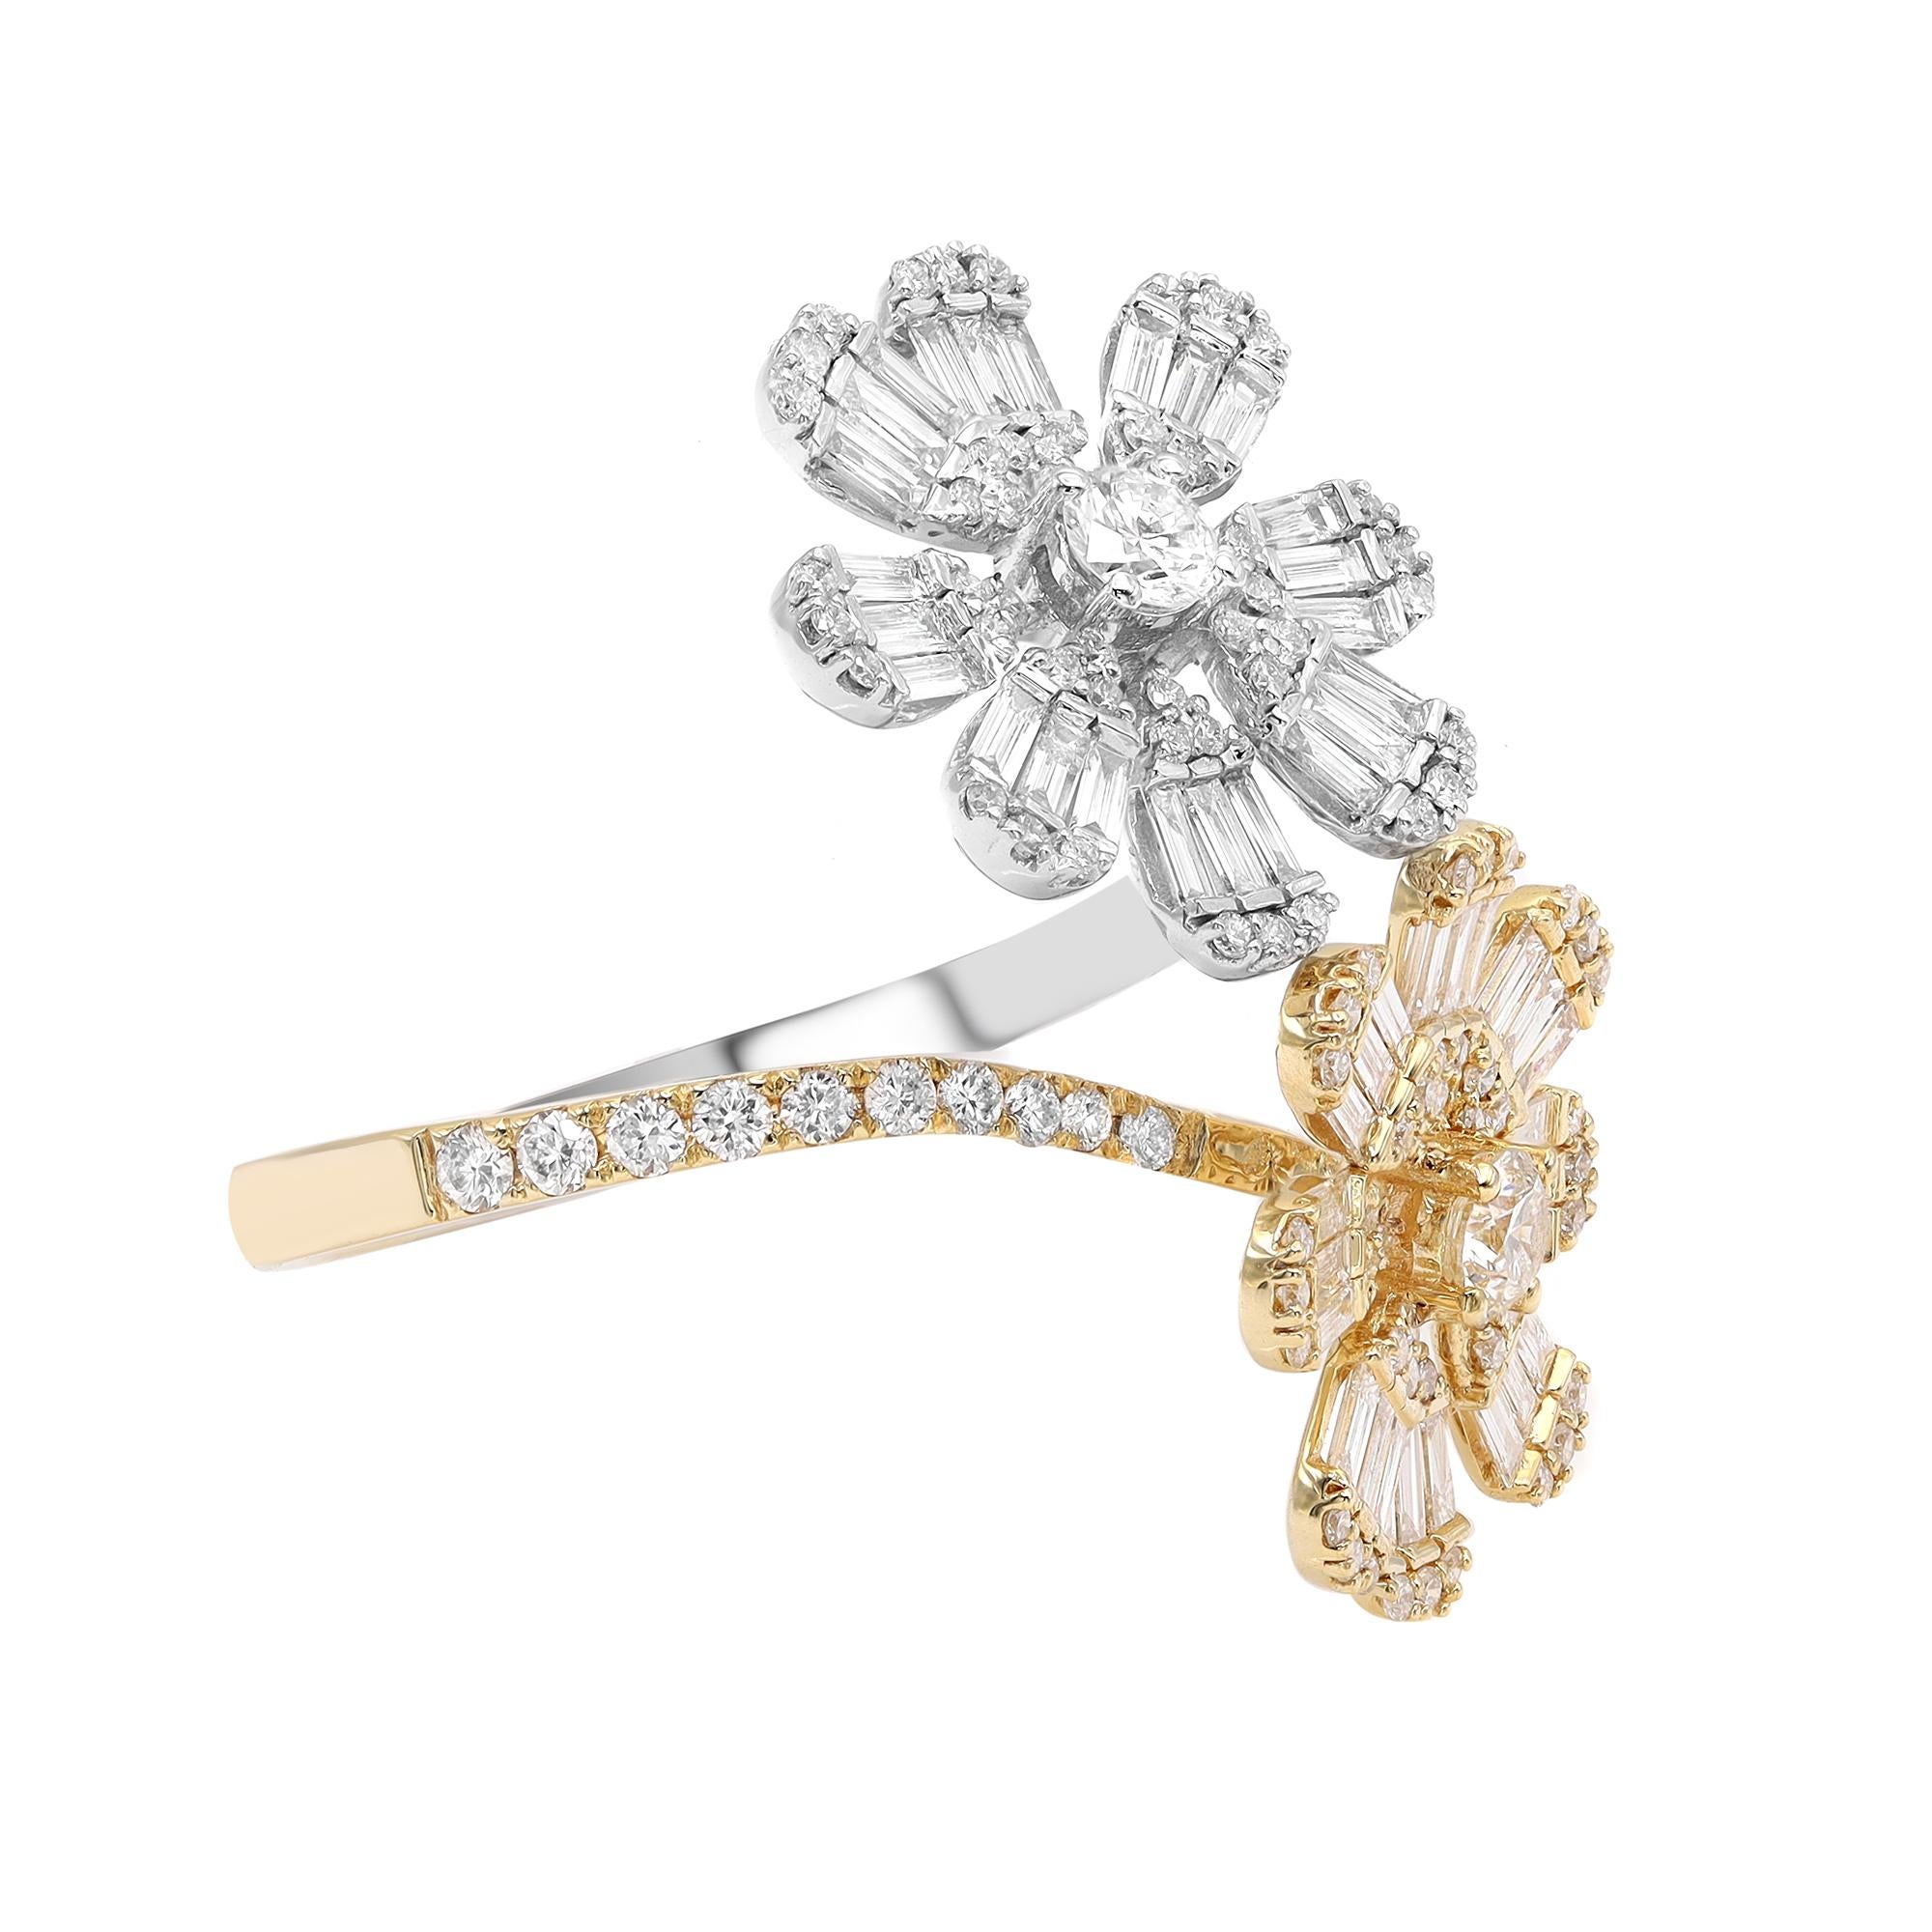 Fun and beautiful diamond criss cross flower cocktail ring. This ring features two beautifully crafted flowers in 18k white and yellow gold, encrusted with dazzling round and baguette cut diamonds. A great pick for any occasion. Total diamond